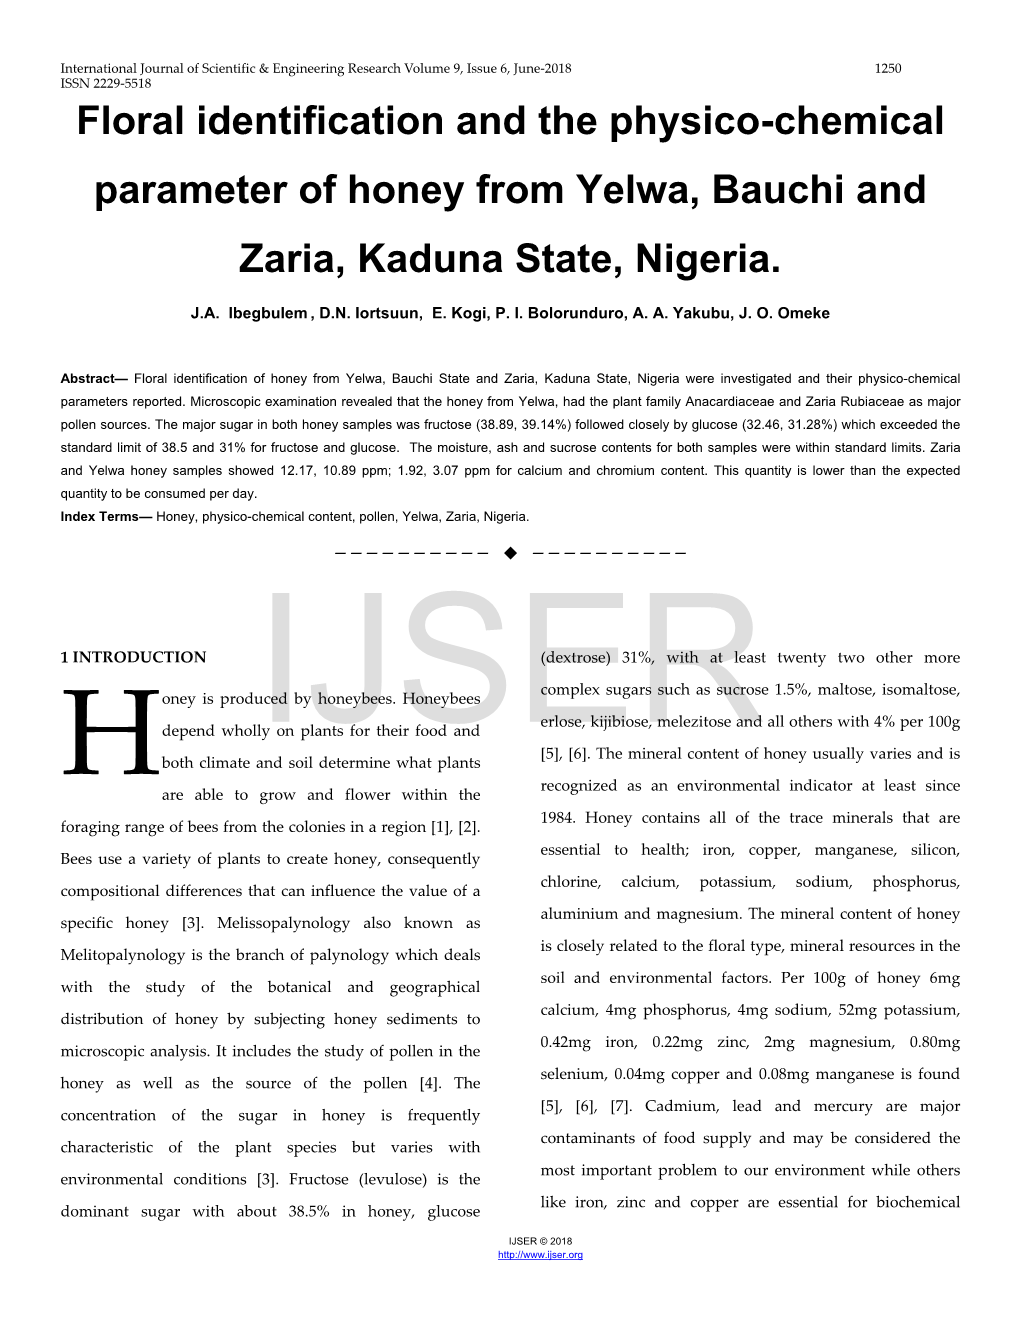 Floral Identification and the Physico-Chemical Parameter of Honey from Yelwa, Bauchi and Zaria, Kaduna State, Nigeria